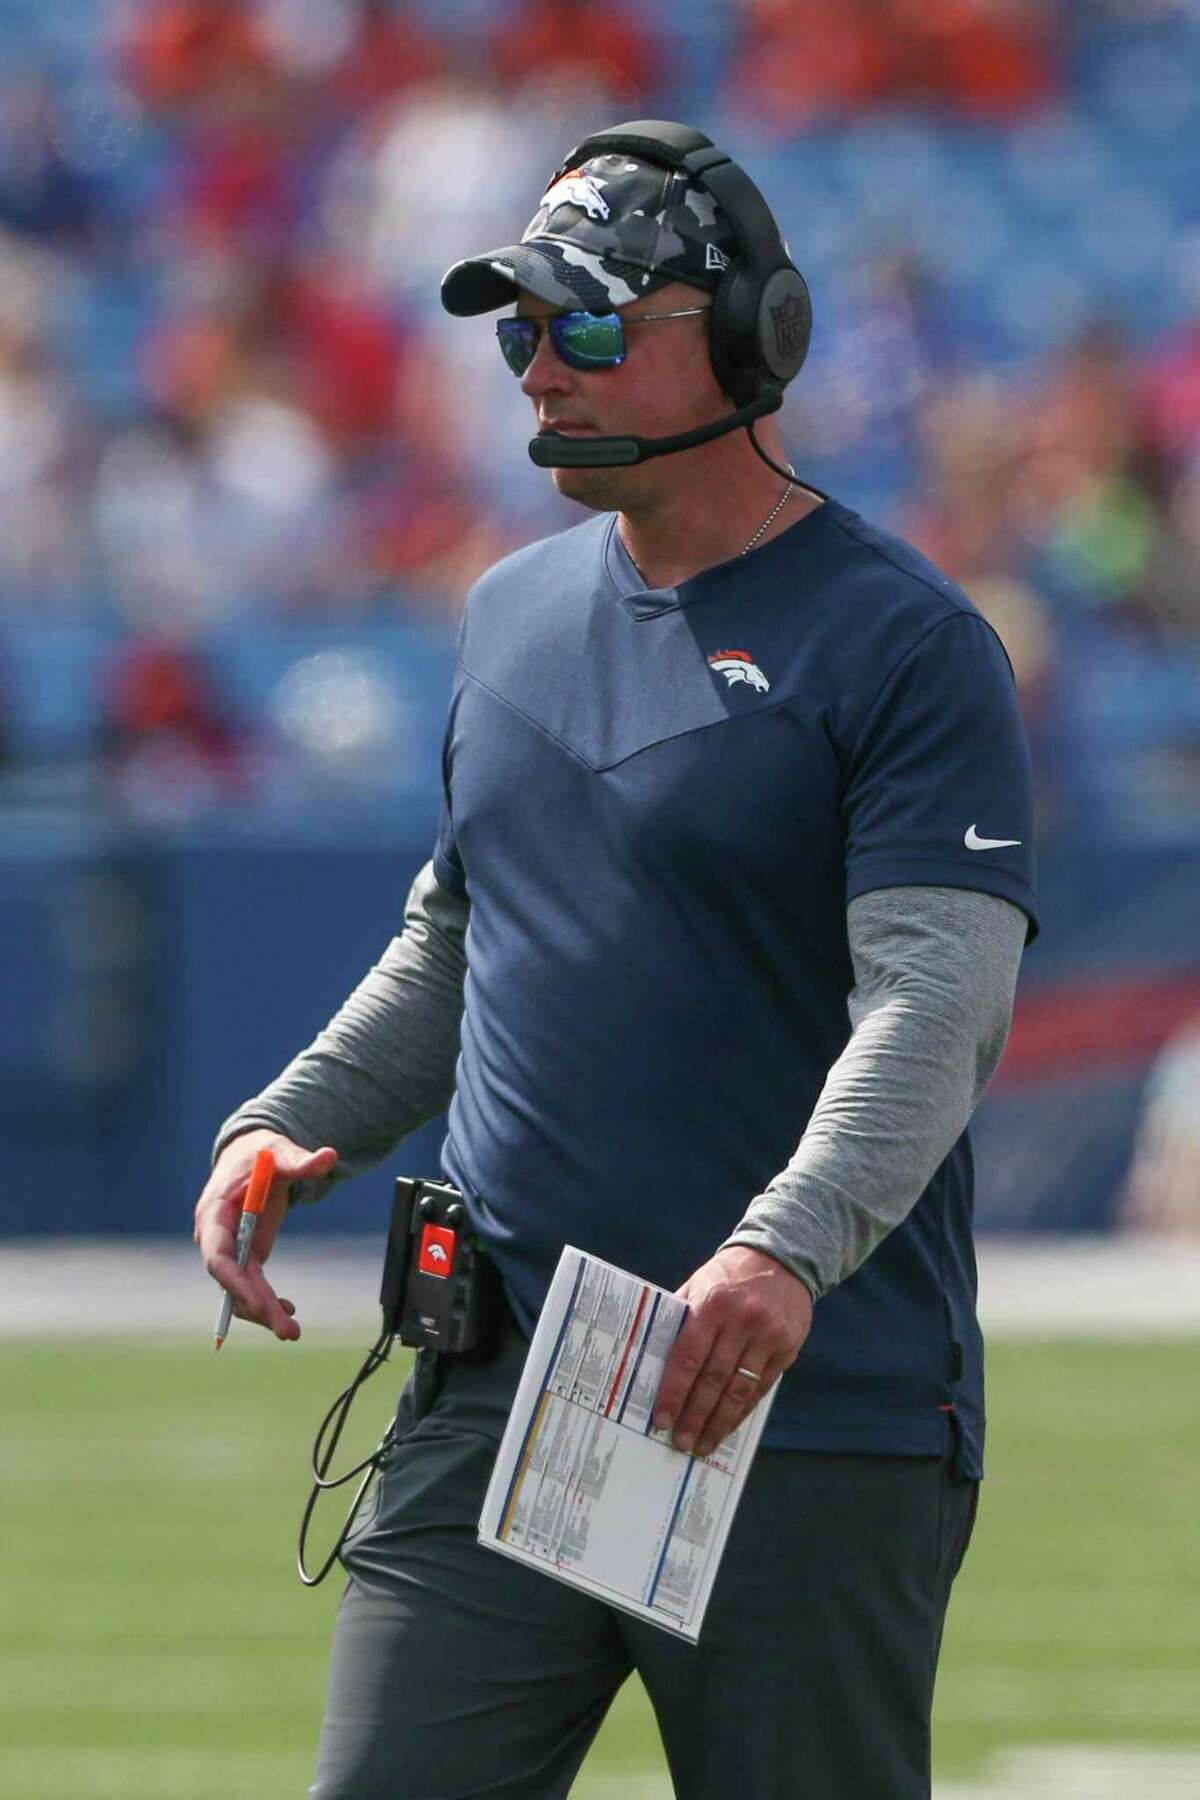 Denver Broncos head coach Nathaniel Hackett during the second half of a preseason NFL football game against the Buffalo Bills, Saturday, Aug. 20, 2022, in Orchard Park, N.Y. (AP Photo/Joshua Bessex)